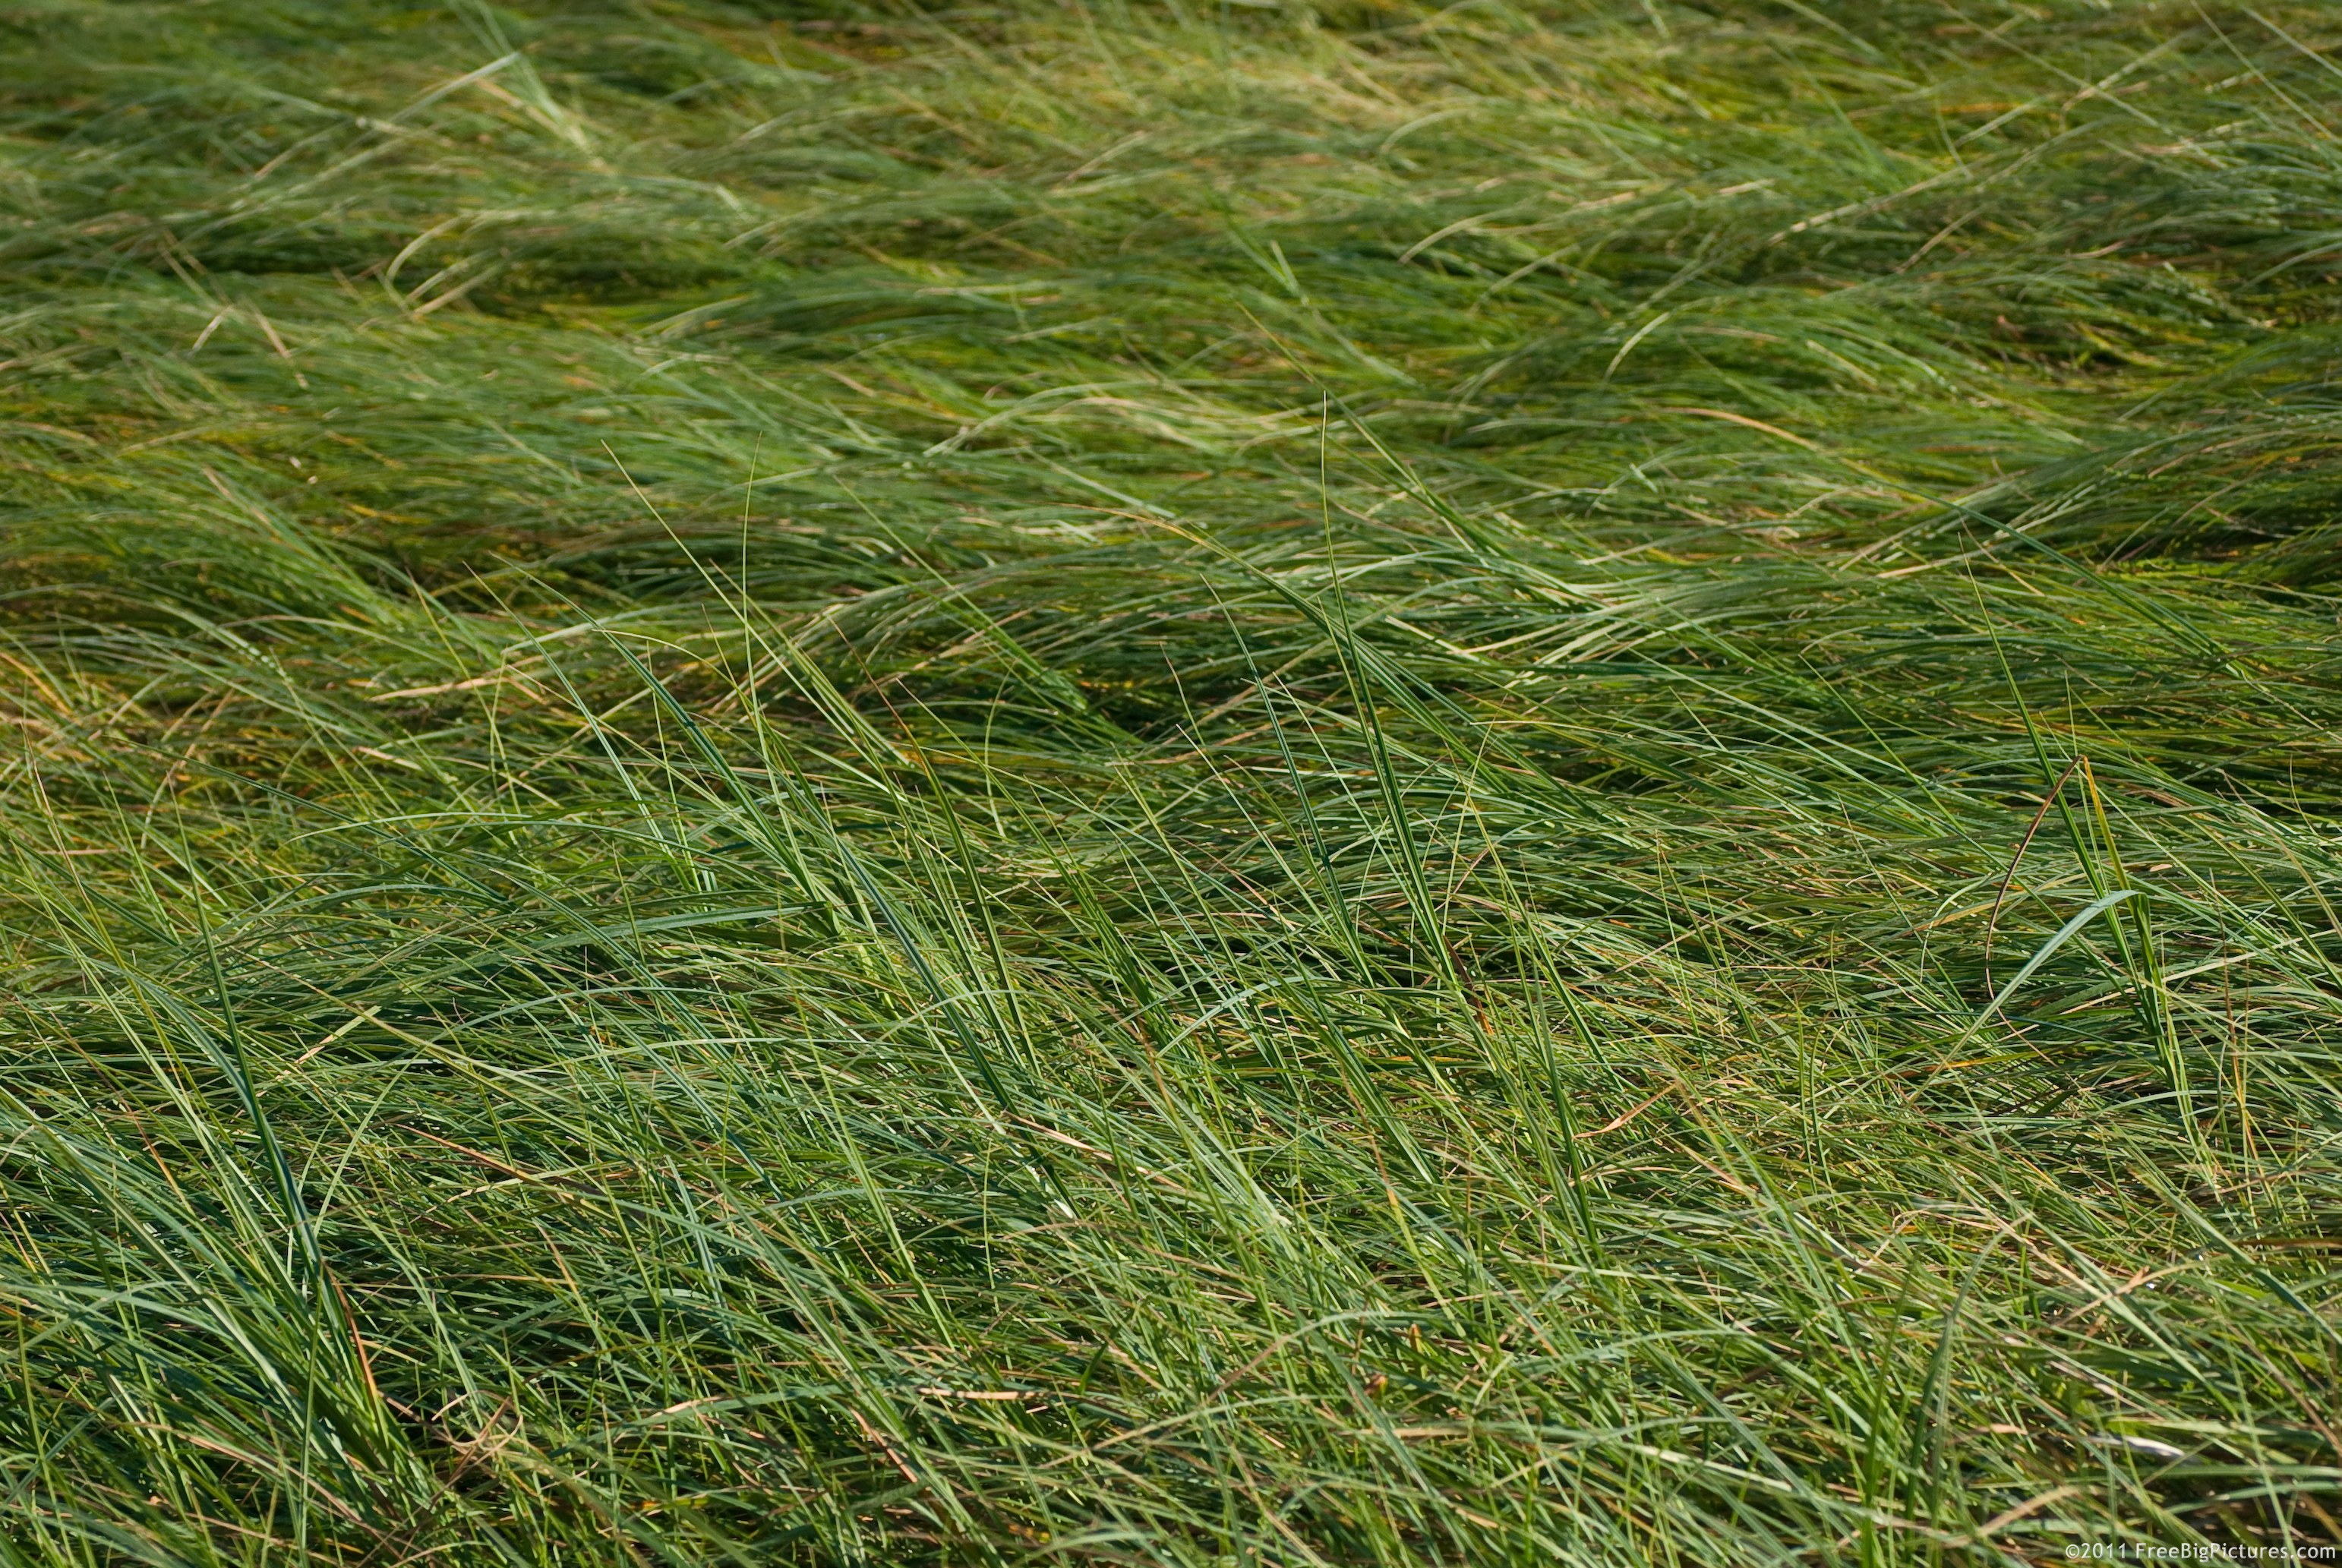 A green field of grass, bent by the wind